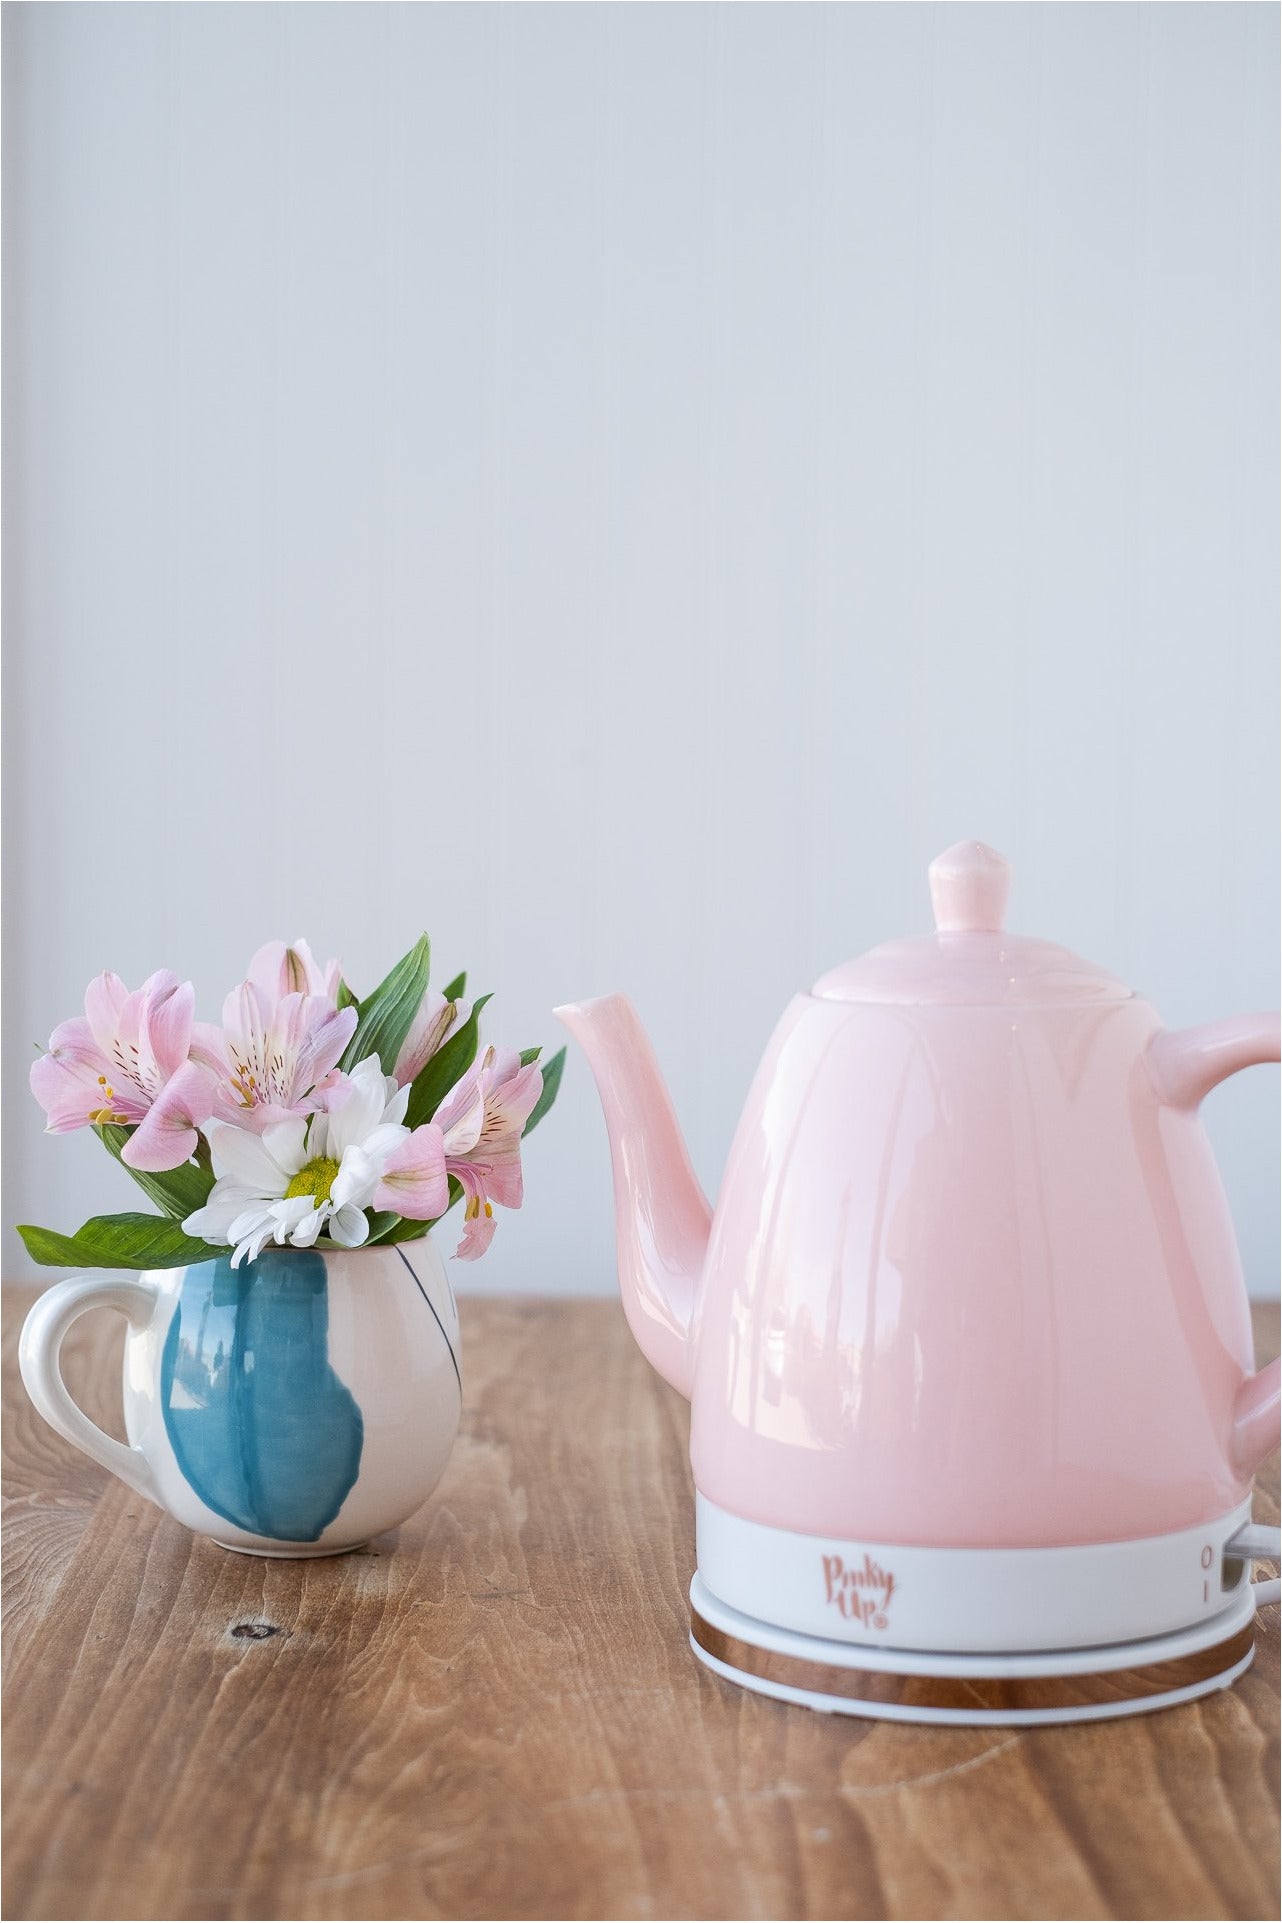 Noelle™ Pink Ceramic Electric Tea Kettle by Pinky Up®, Pack of 1